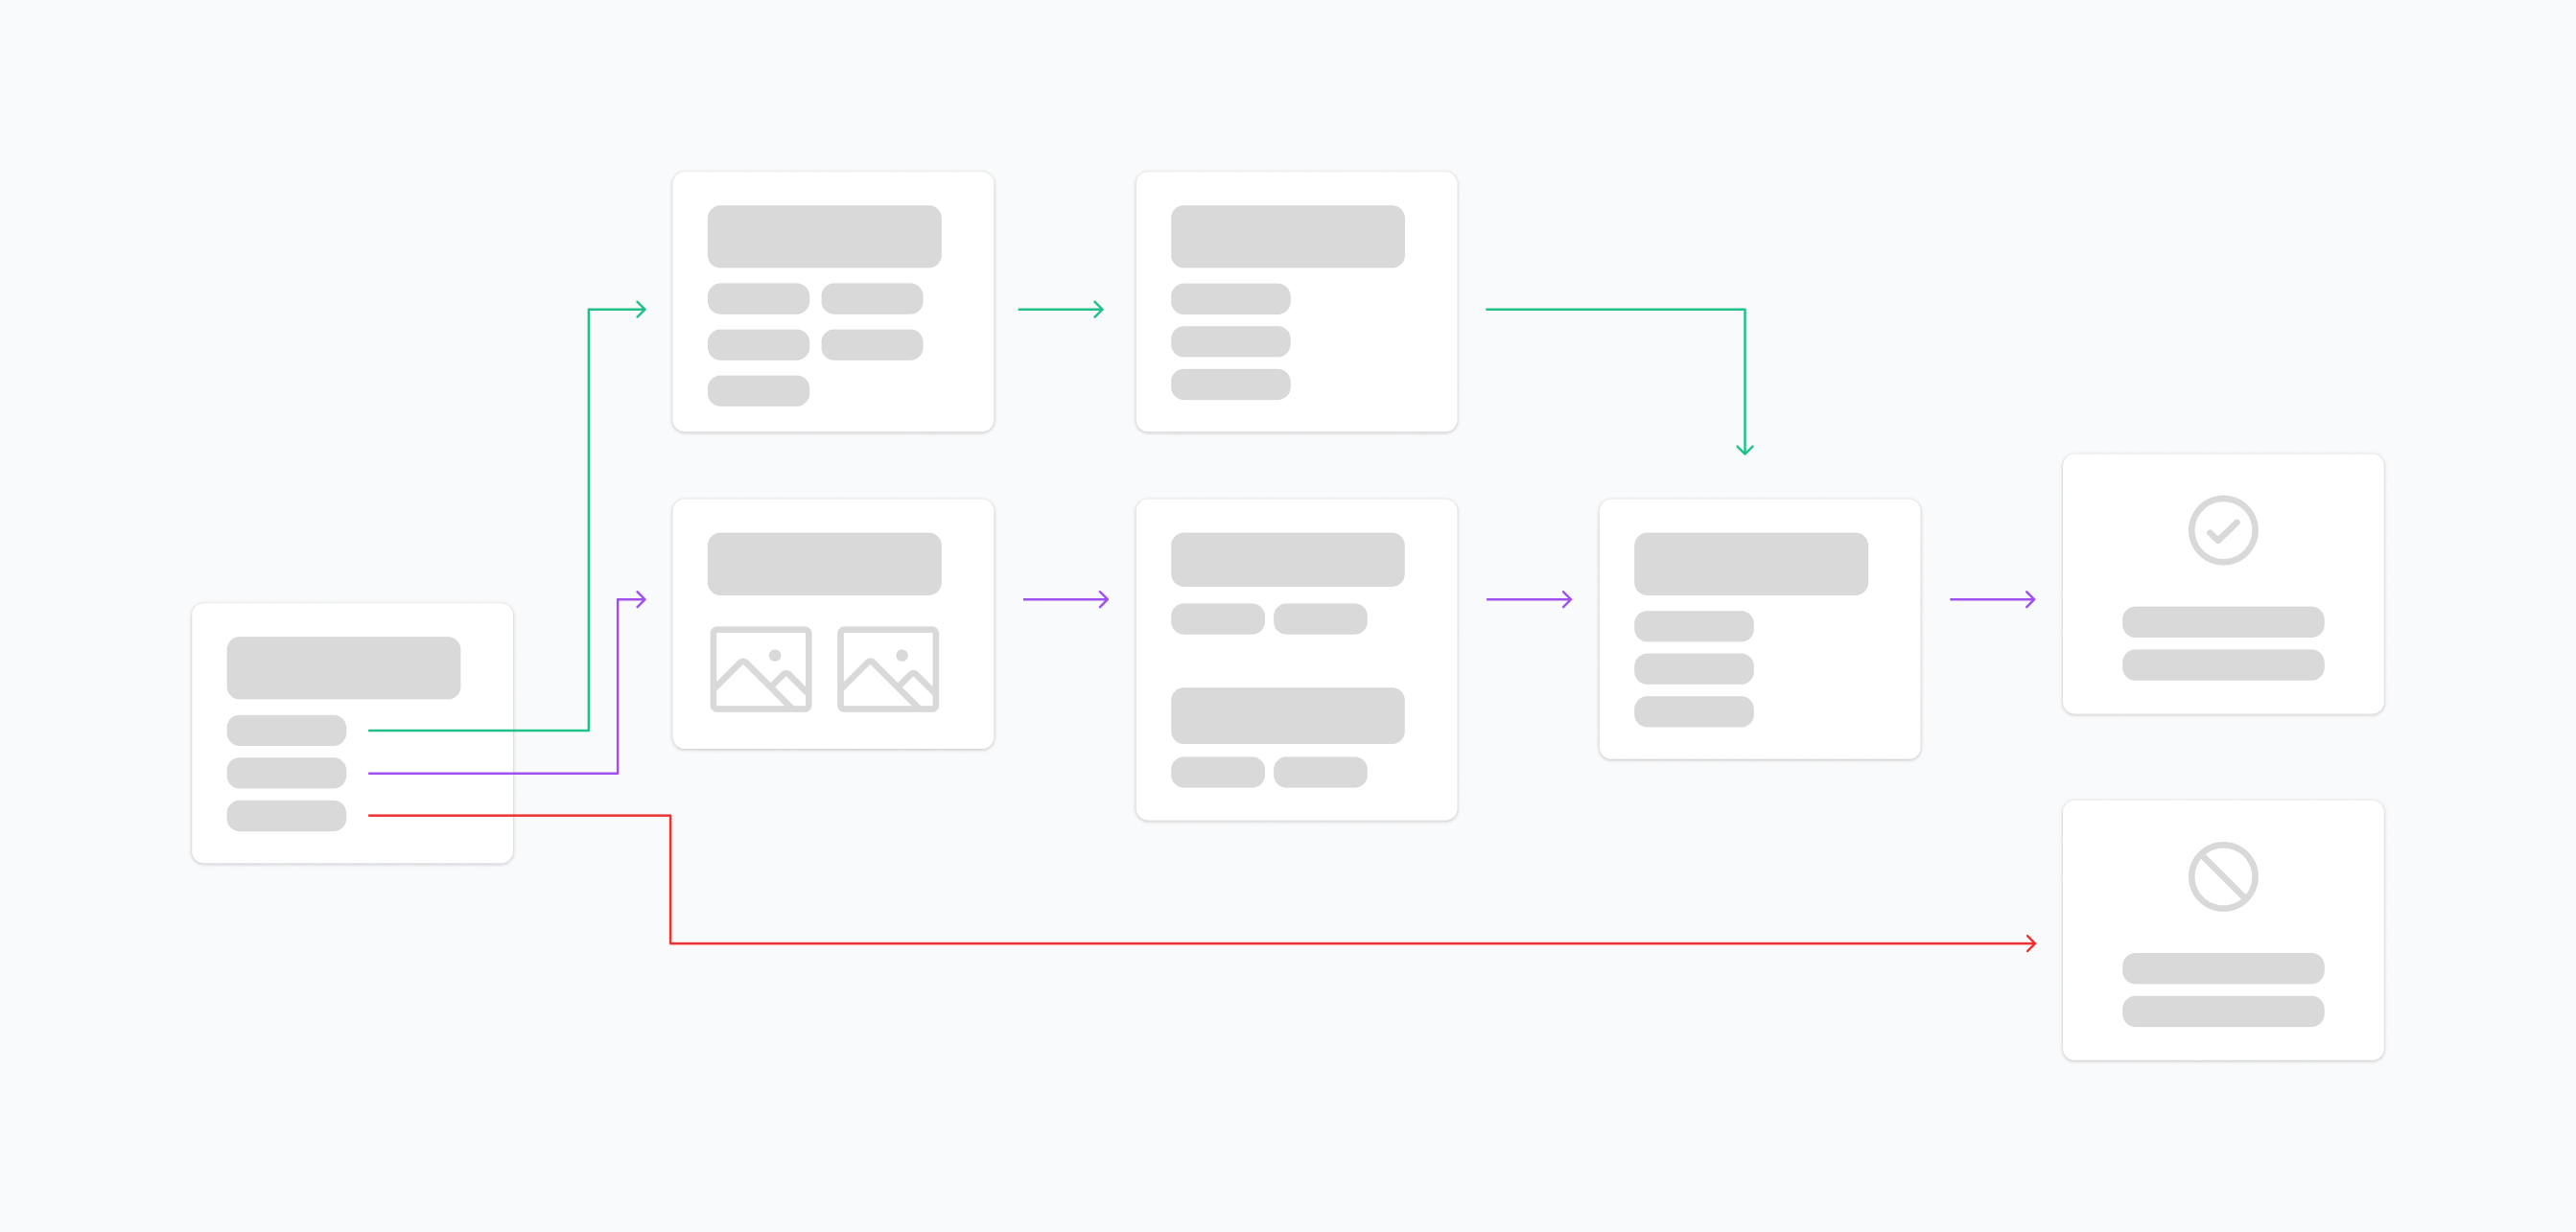 Flow chart showing user journey with skip logic